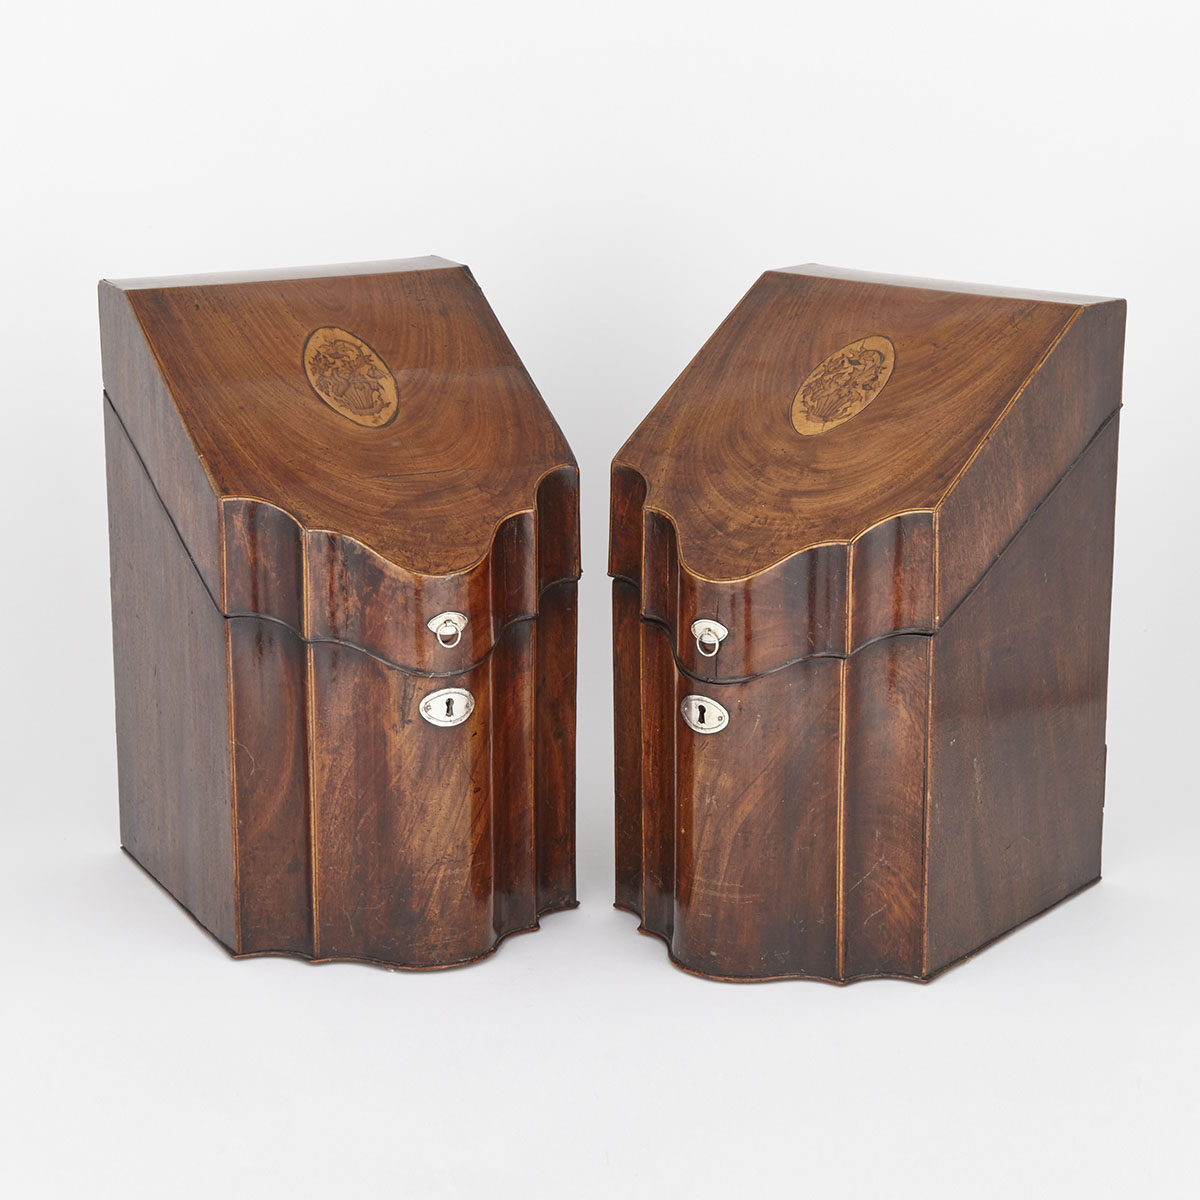 Pair of Georgian Satinwood Strung and Inlaid Flame Mahogany Knife Boxes, early 19th century